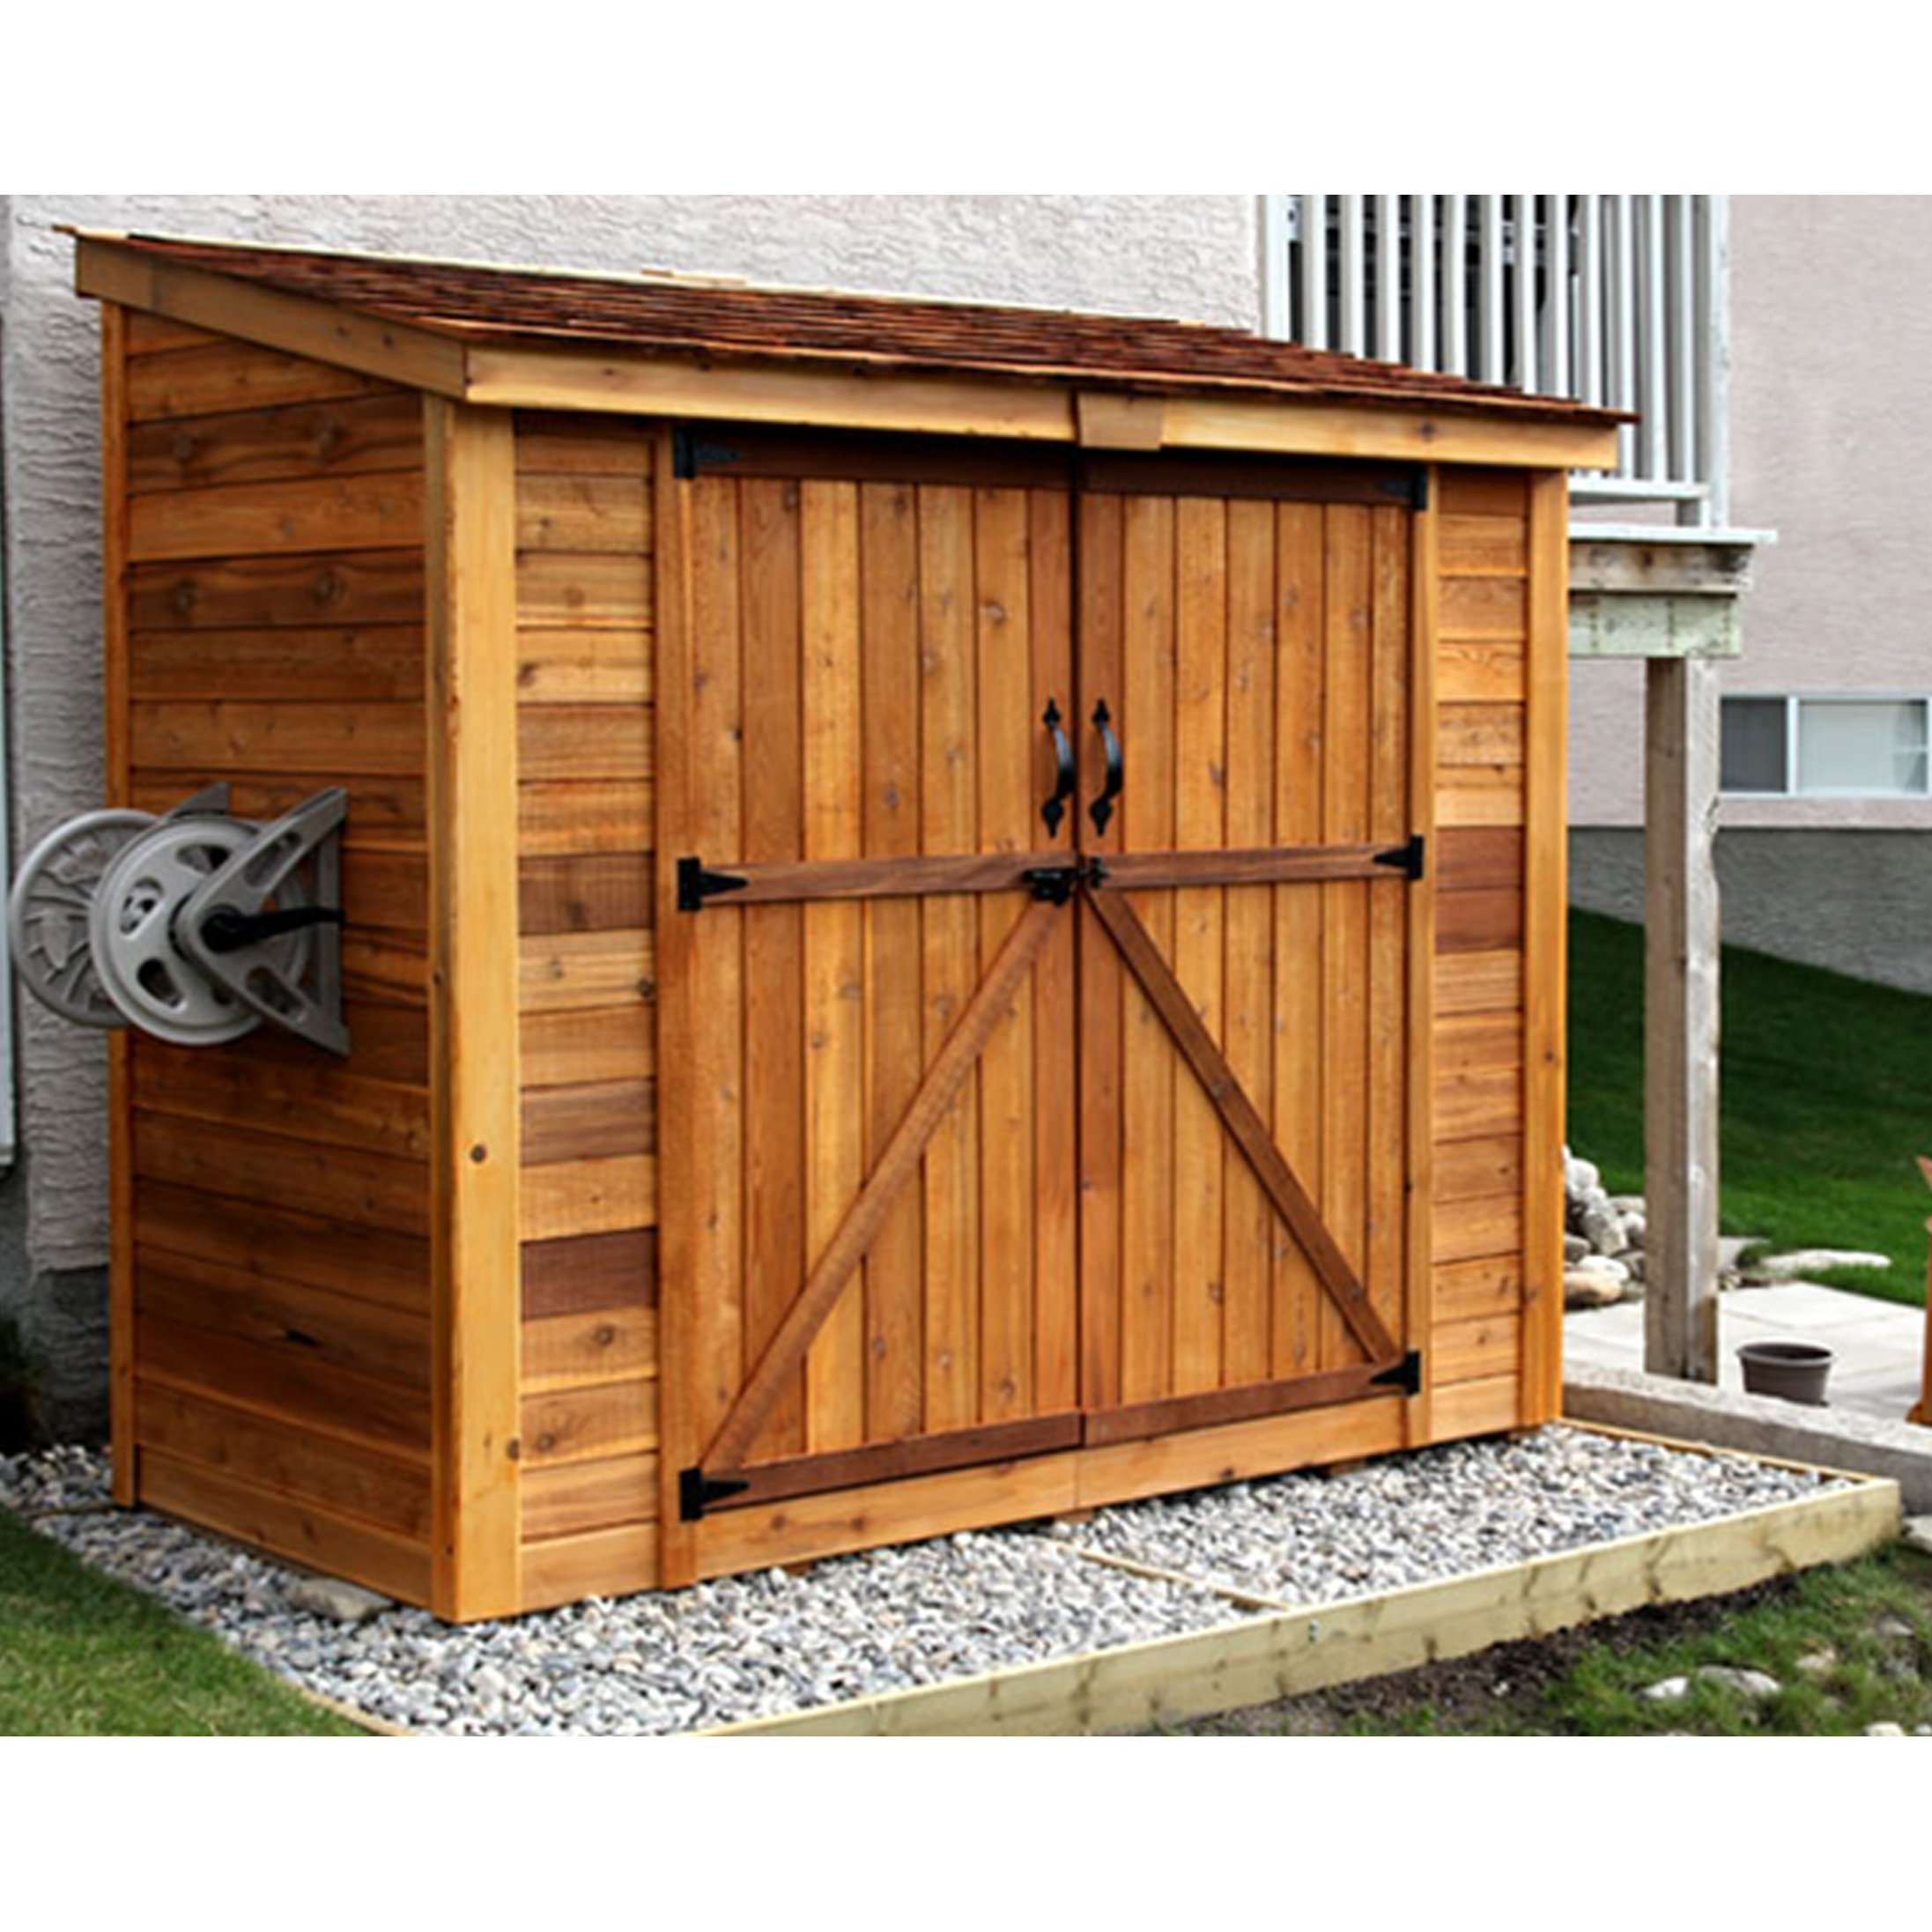 6' x 12' garden shed the aspen shed solutions